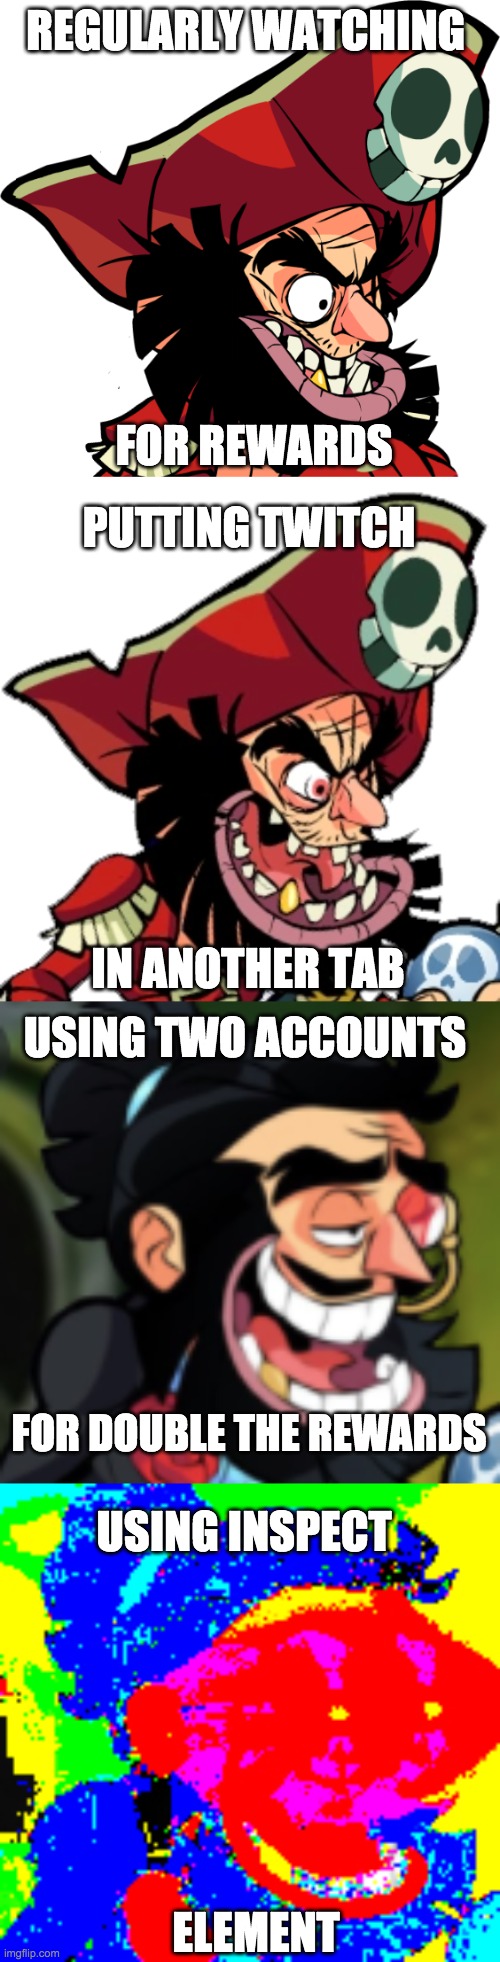 Esports Viewership Rewards in a Nutshell | REGULARLY WATCHING; FOR REWARDS; PUTTING TWITCH; IN ANOTHER TAB; USING TWO ACCOUNTS; FOR DOUBLE THE REWARDS; USING INSPECT; ELEMENT | image tagged in memes,brawlhalla | made w/ Imgflip meme maker